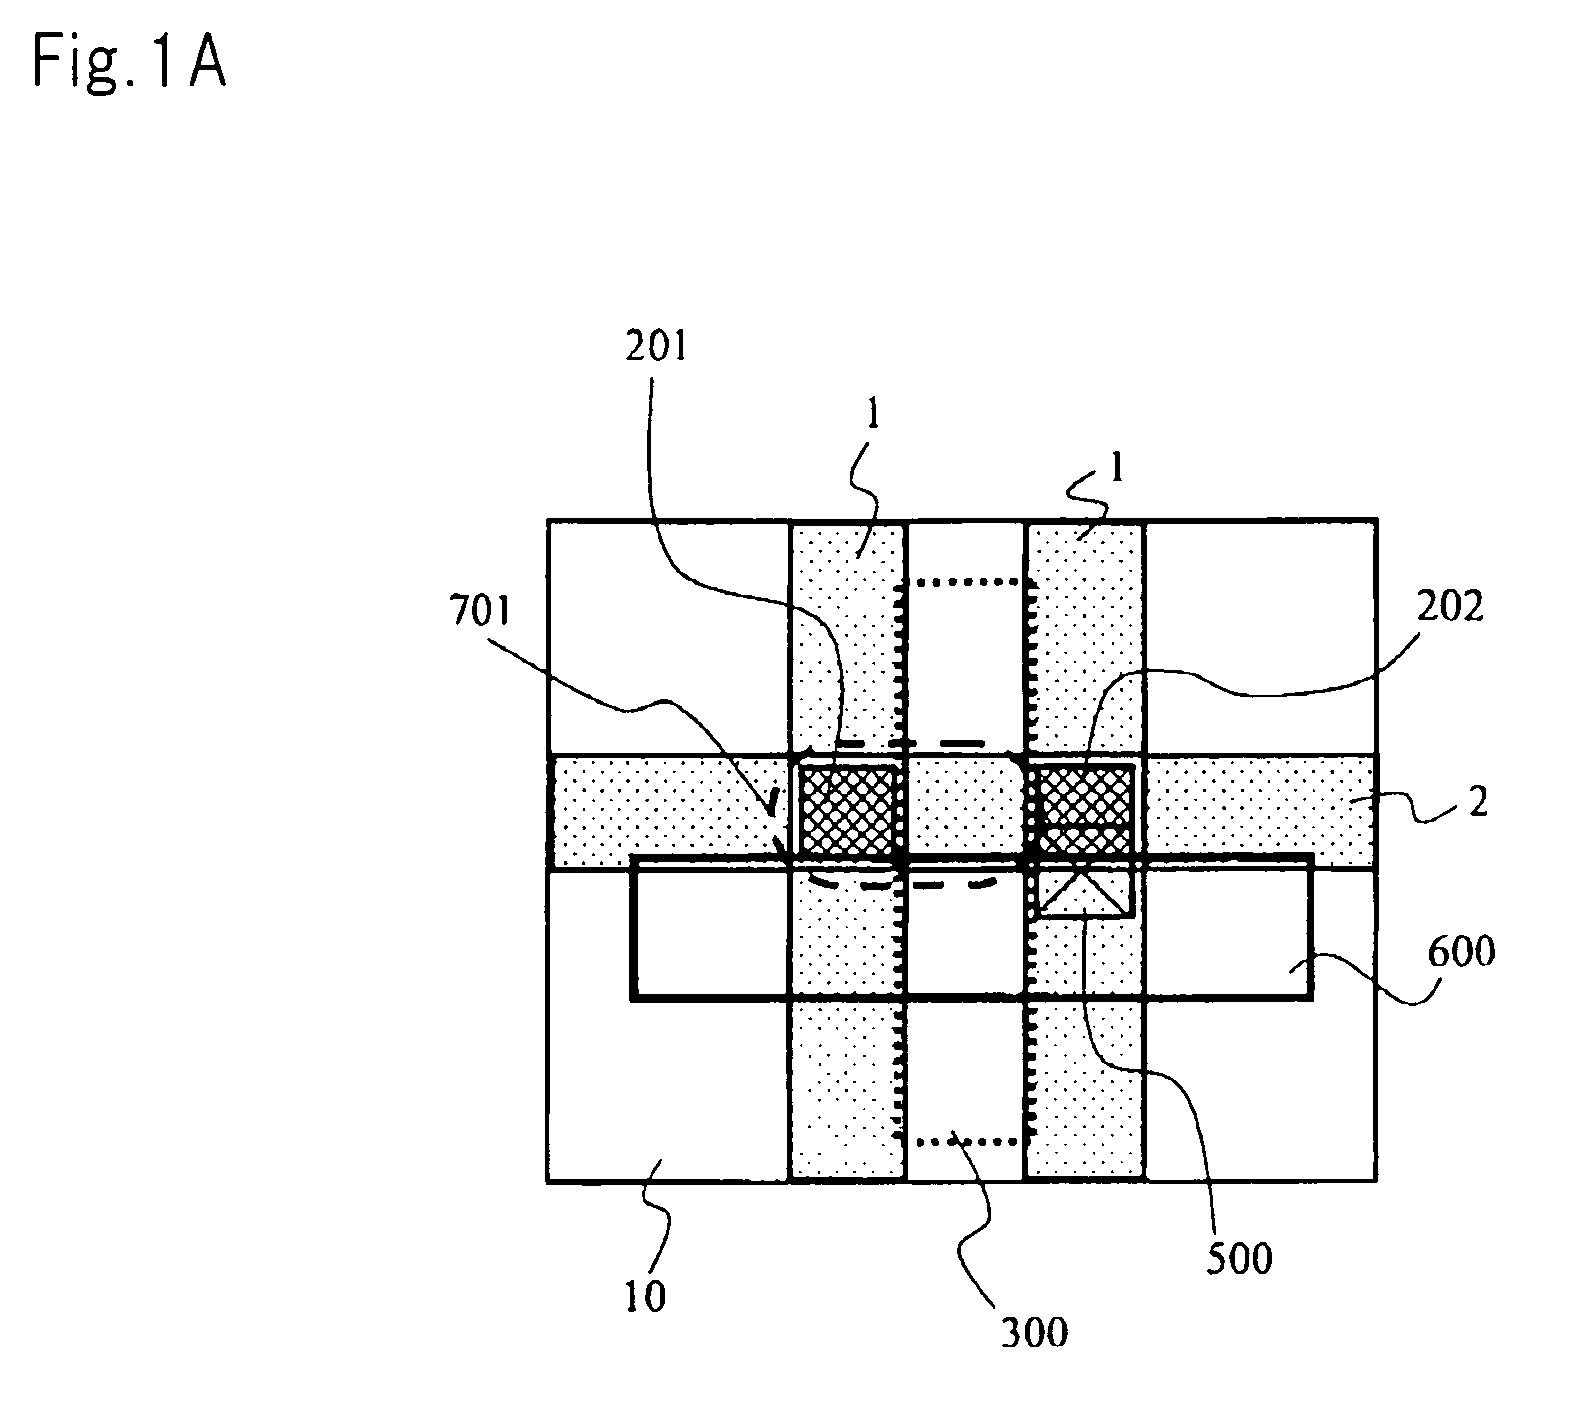 Semiconductor device enabling further microfabrication